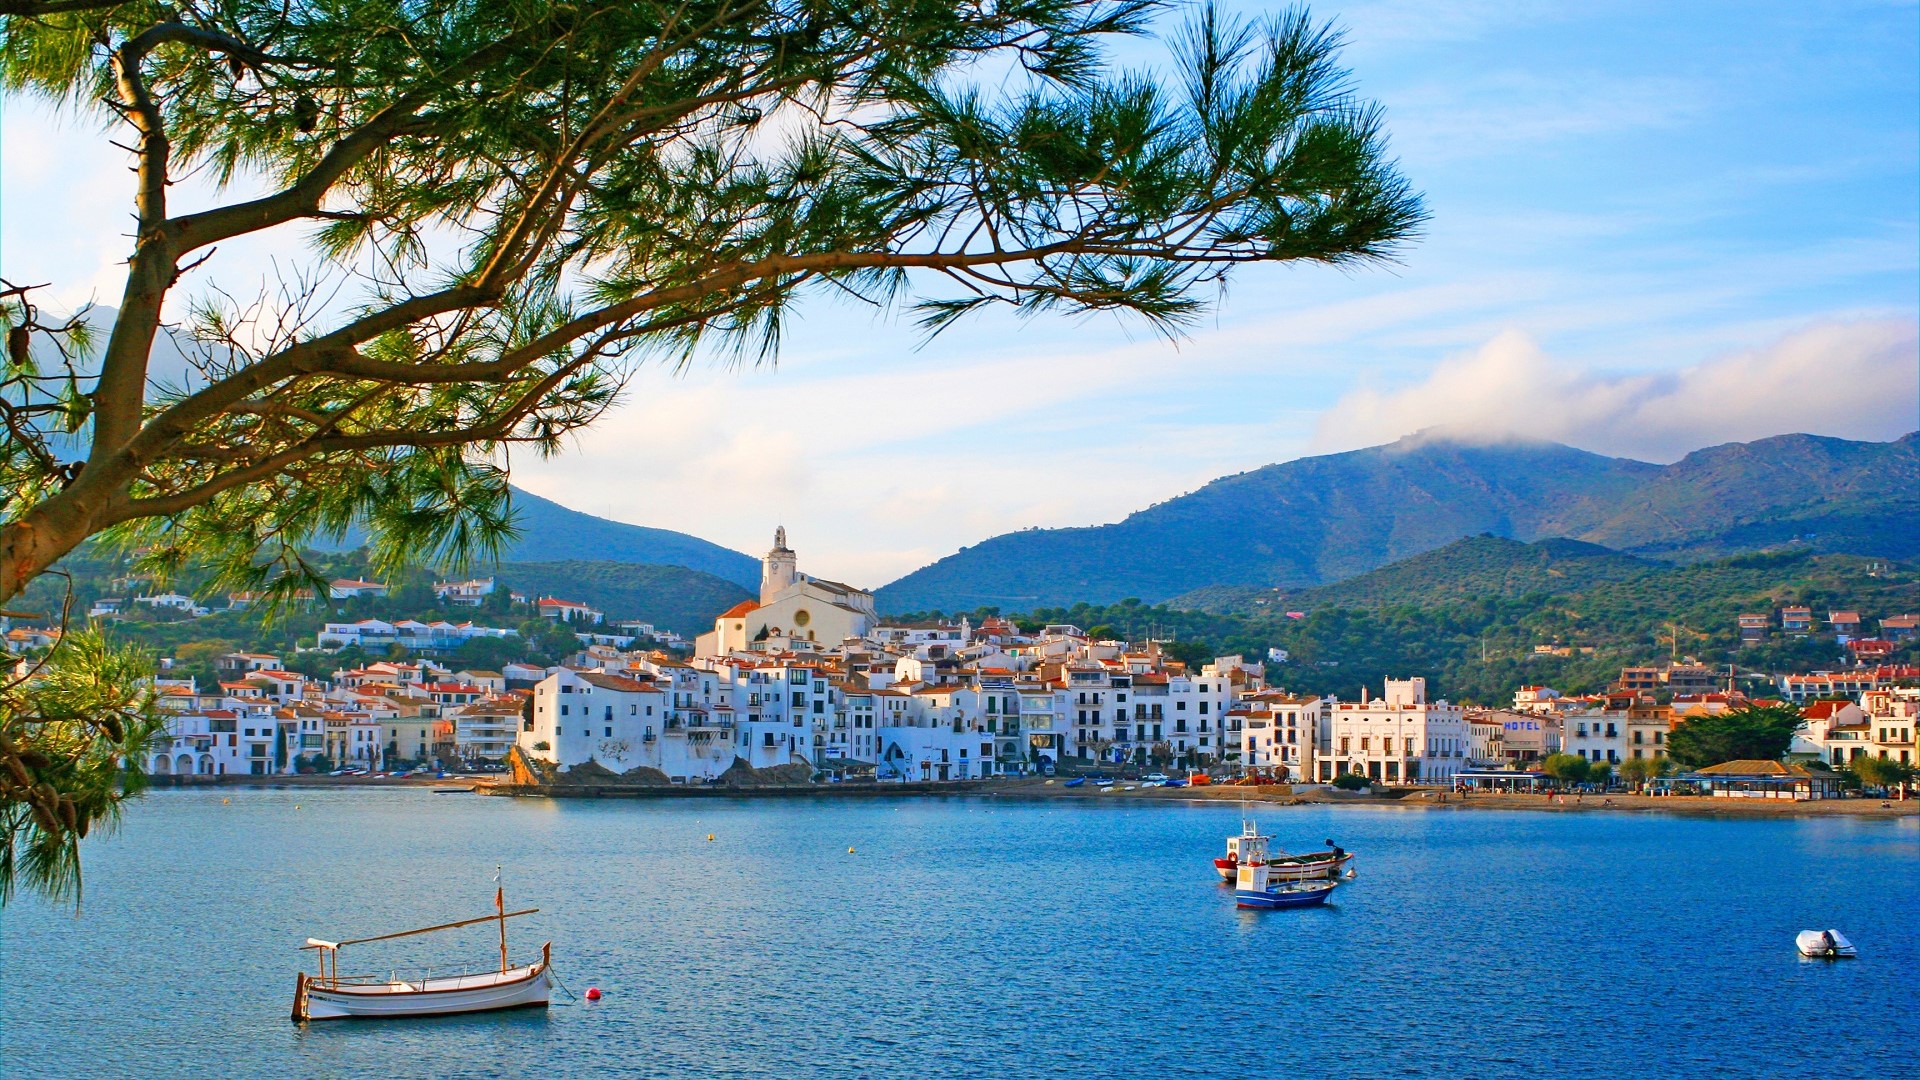 view of the waterfront in Cadaqués, Spain